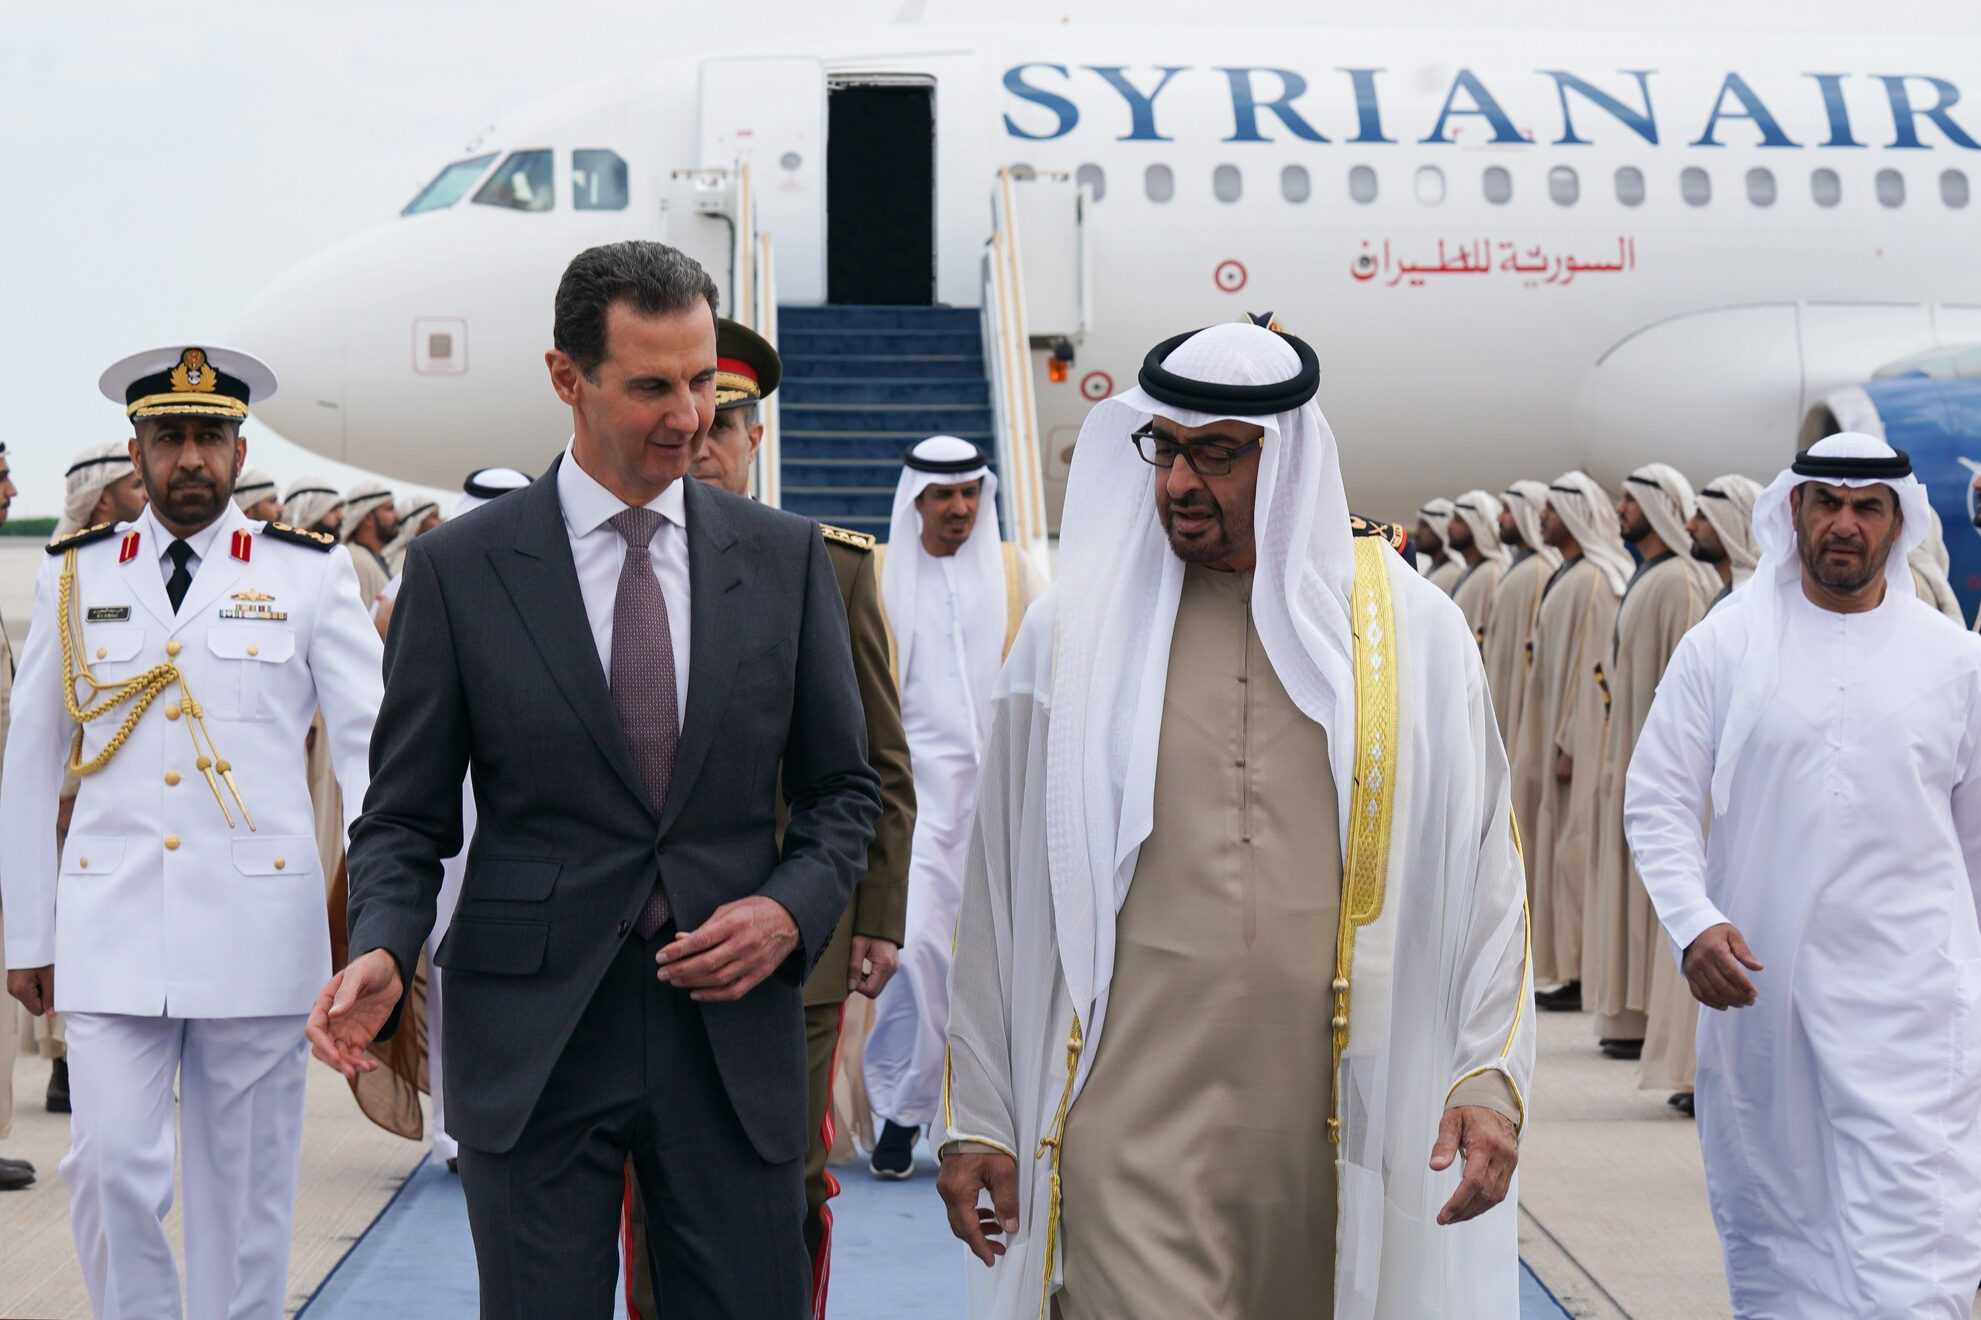 Syria’s Assad Pays Official Visit To United Arab Emirates